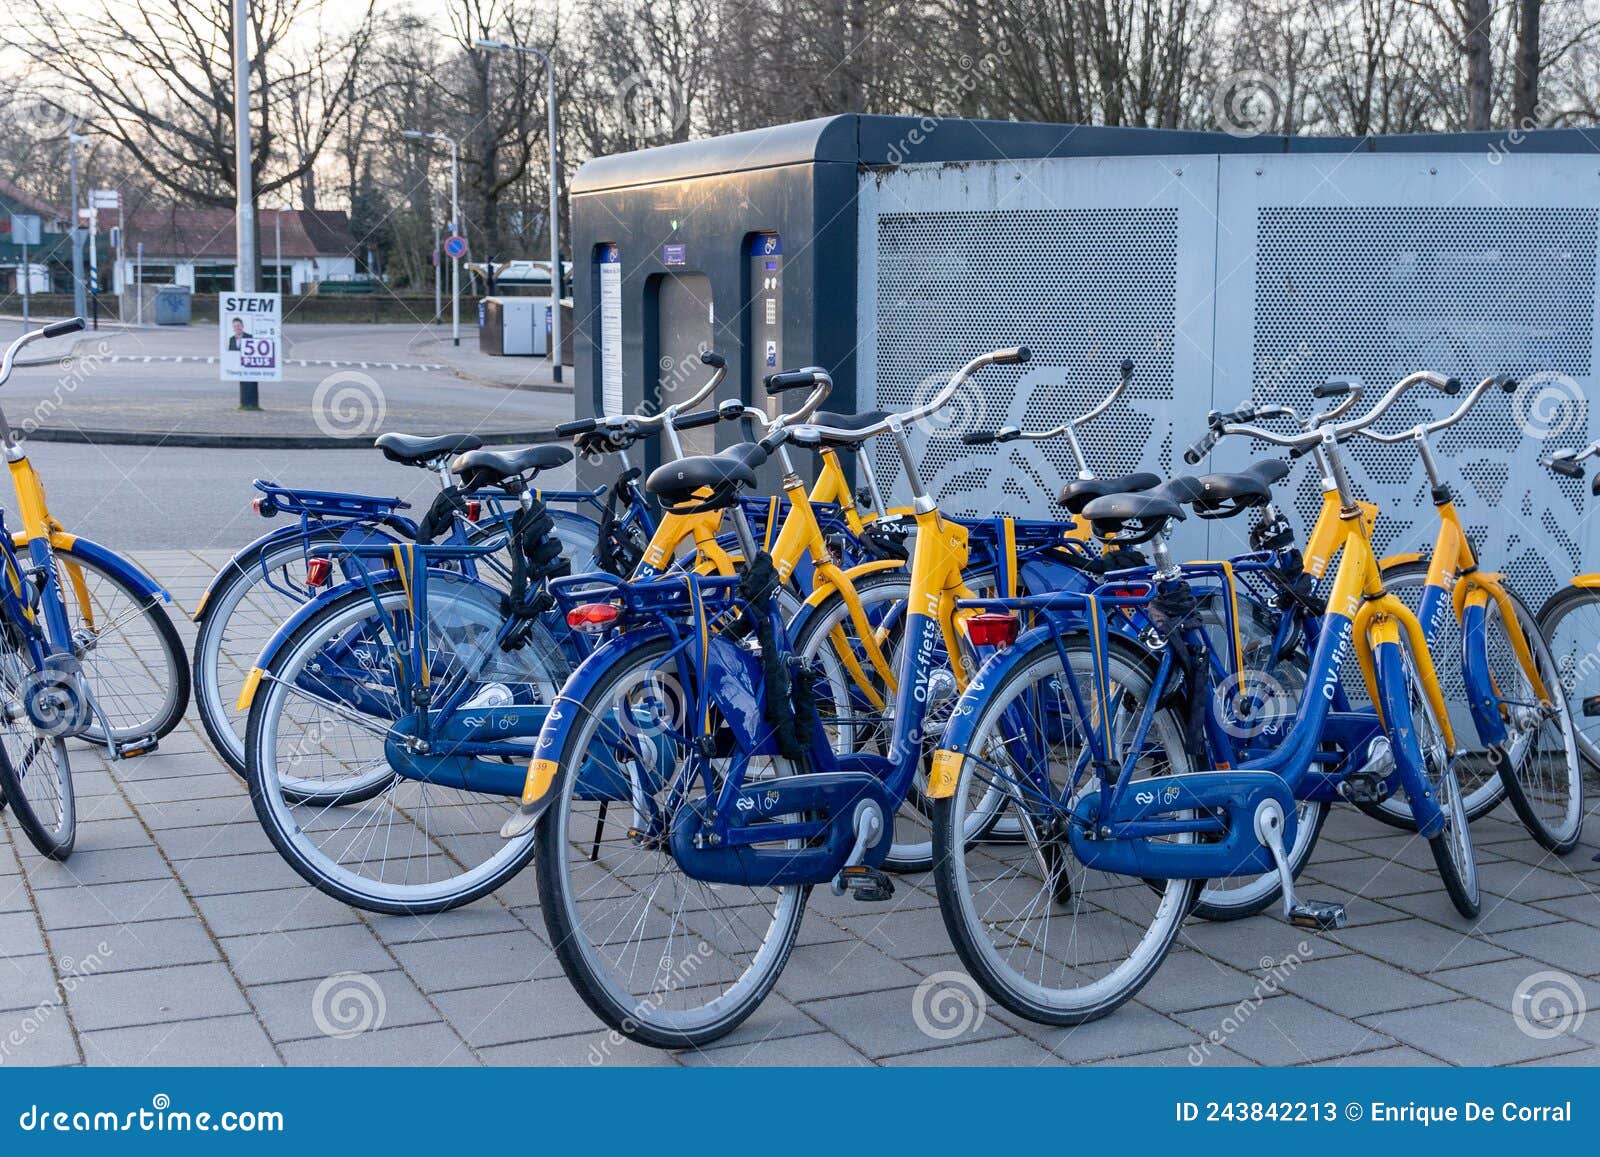 Voor u Orthodox Trunk bibliotheek Tilburg, the Netherlands - March 14, 2022: OV-Fiets Bikes Parked Outside of  the Self Park Hub Editorial Stock Photo - Image of tourism, railway:  243842213